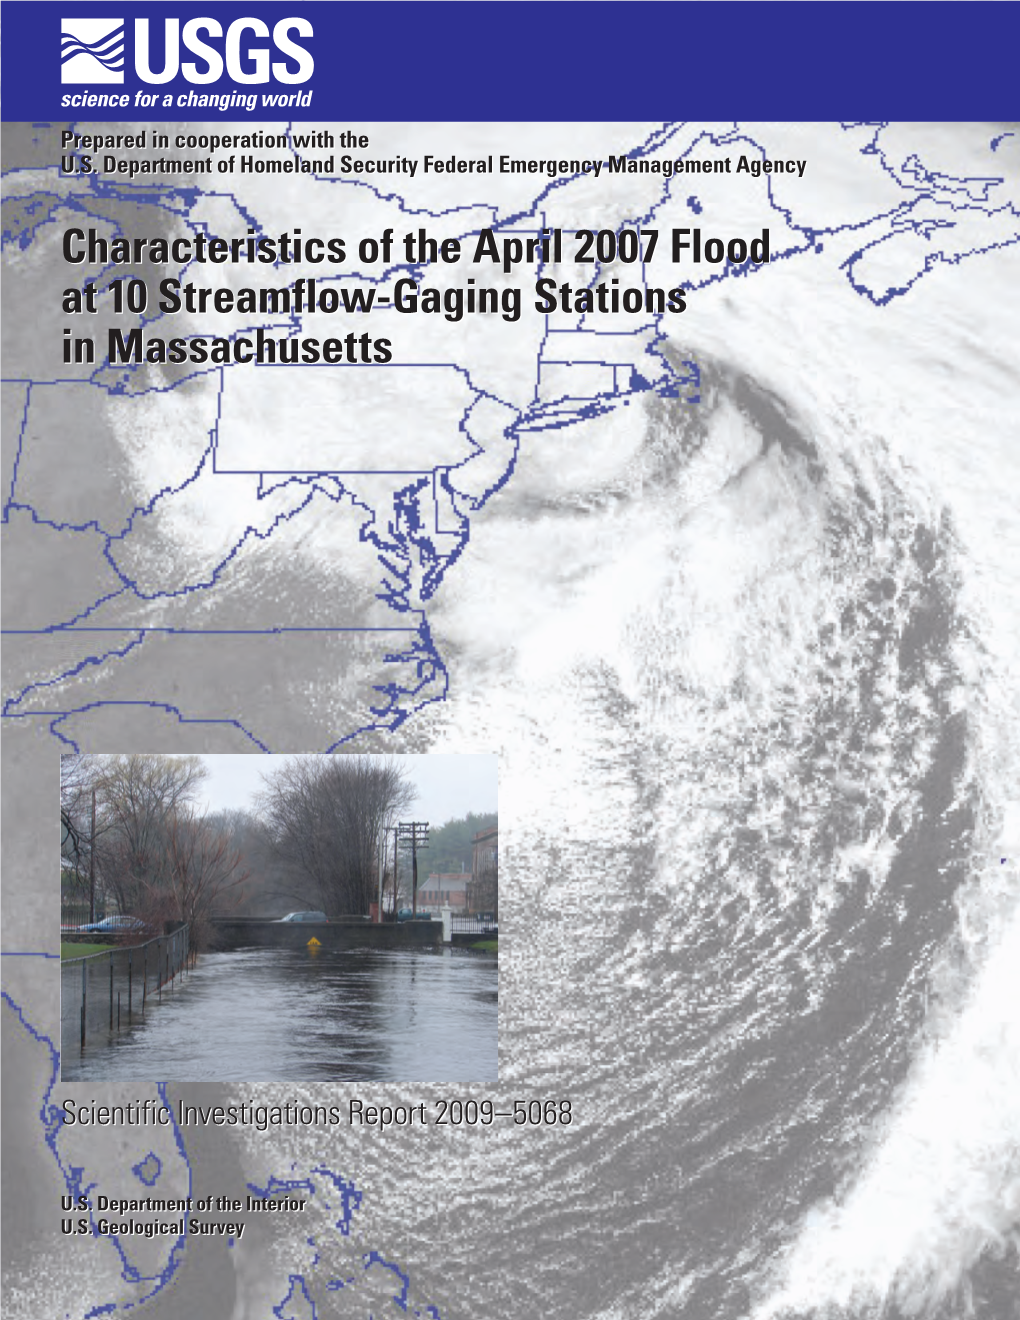 Characteristics of the April 2007 Flood at 10 Streamflow-Gaging Stations in Massachusetts